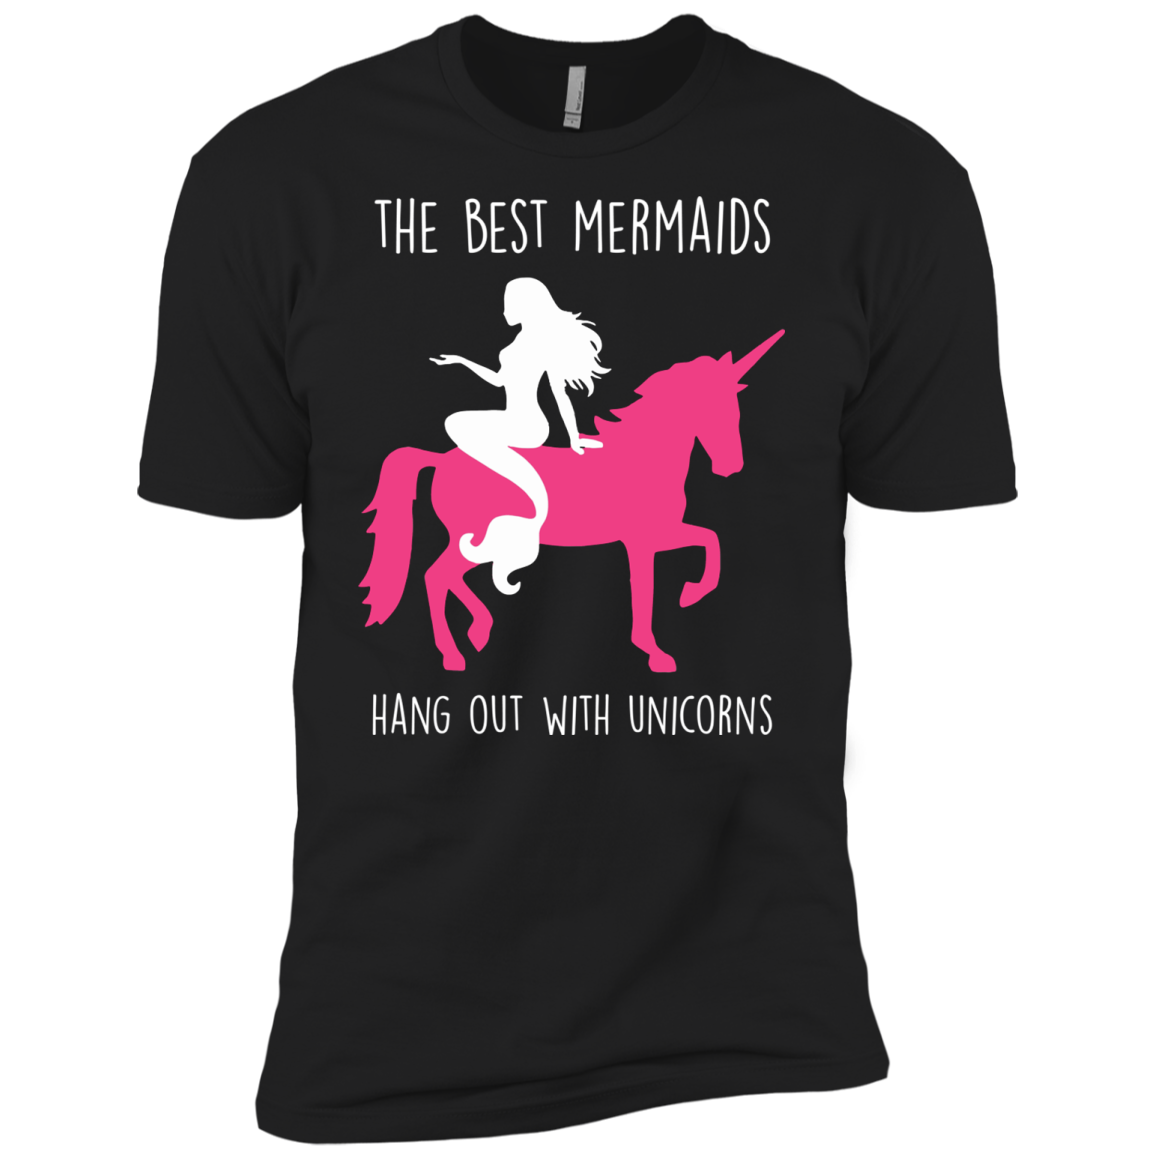 The Best Mermaids Hang Out With Unicorns Shirt